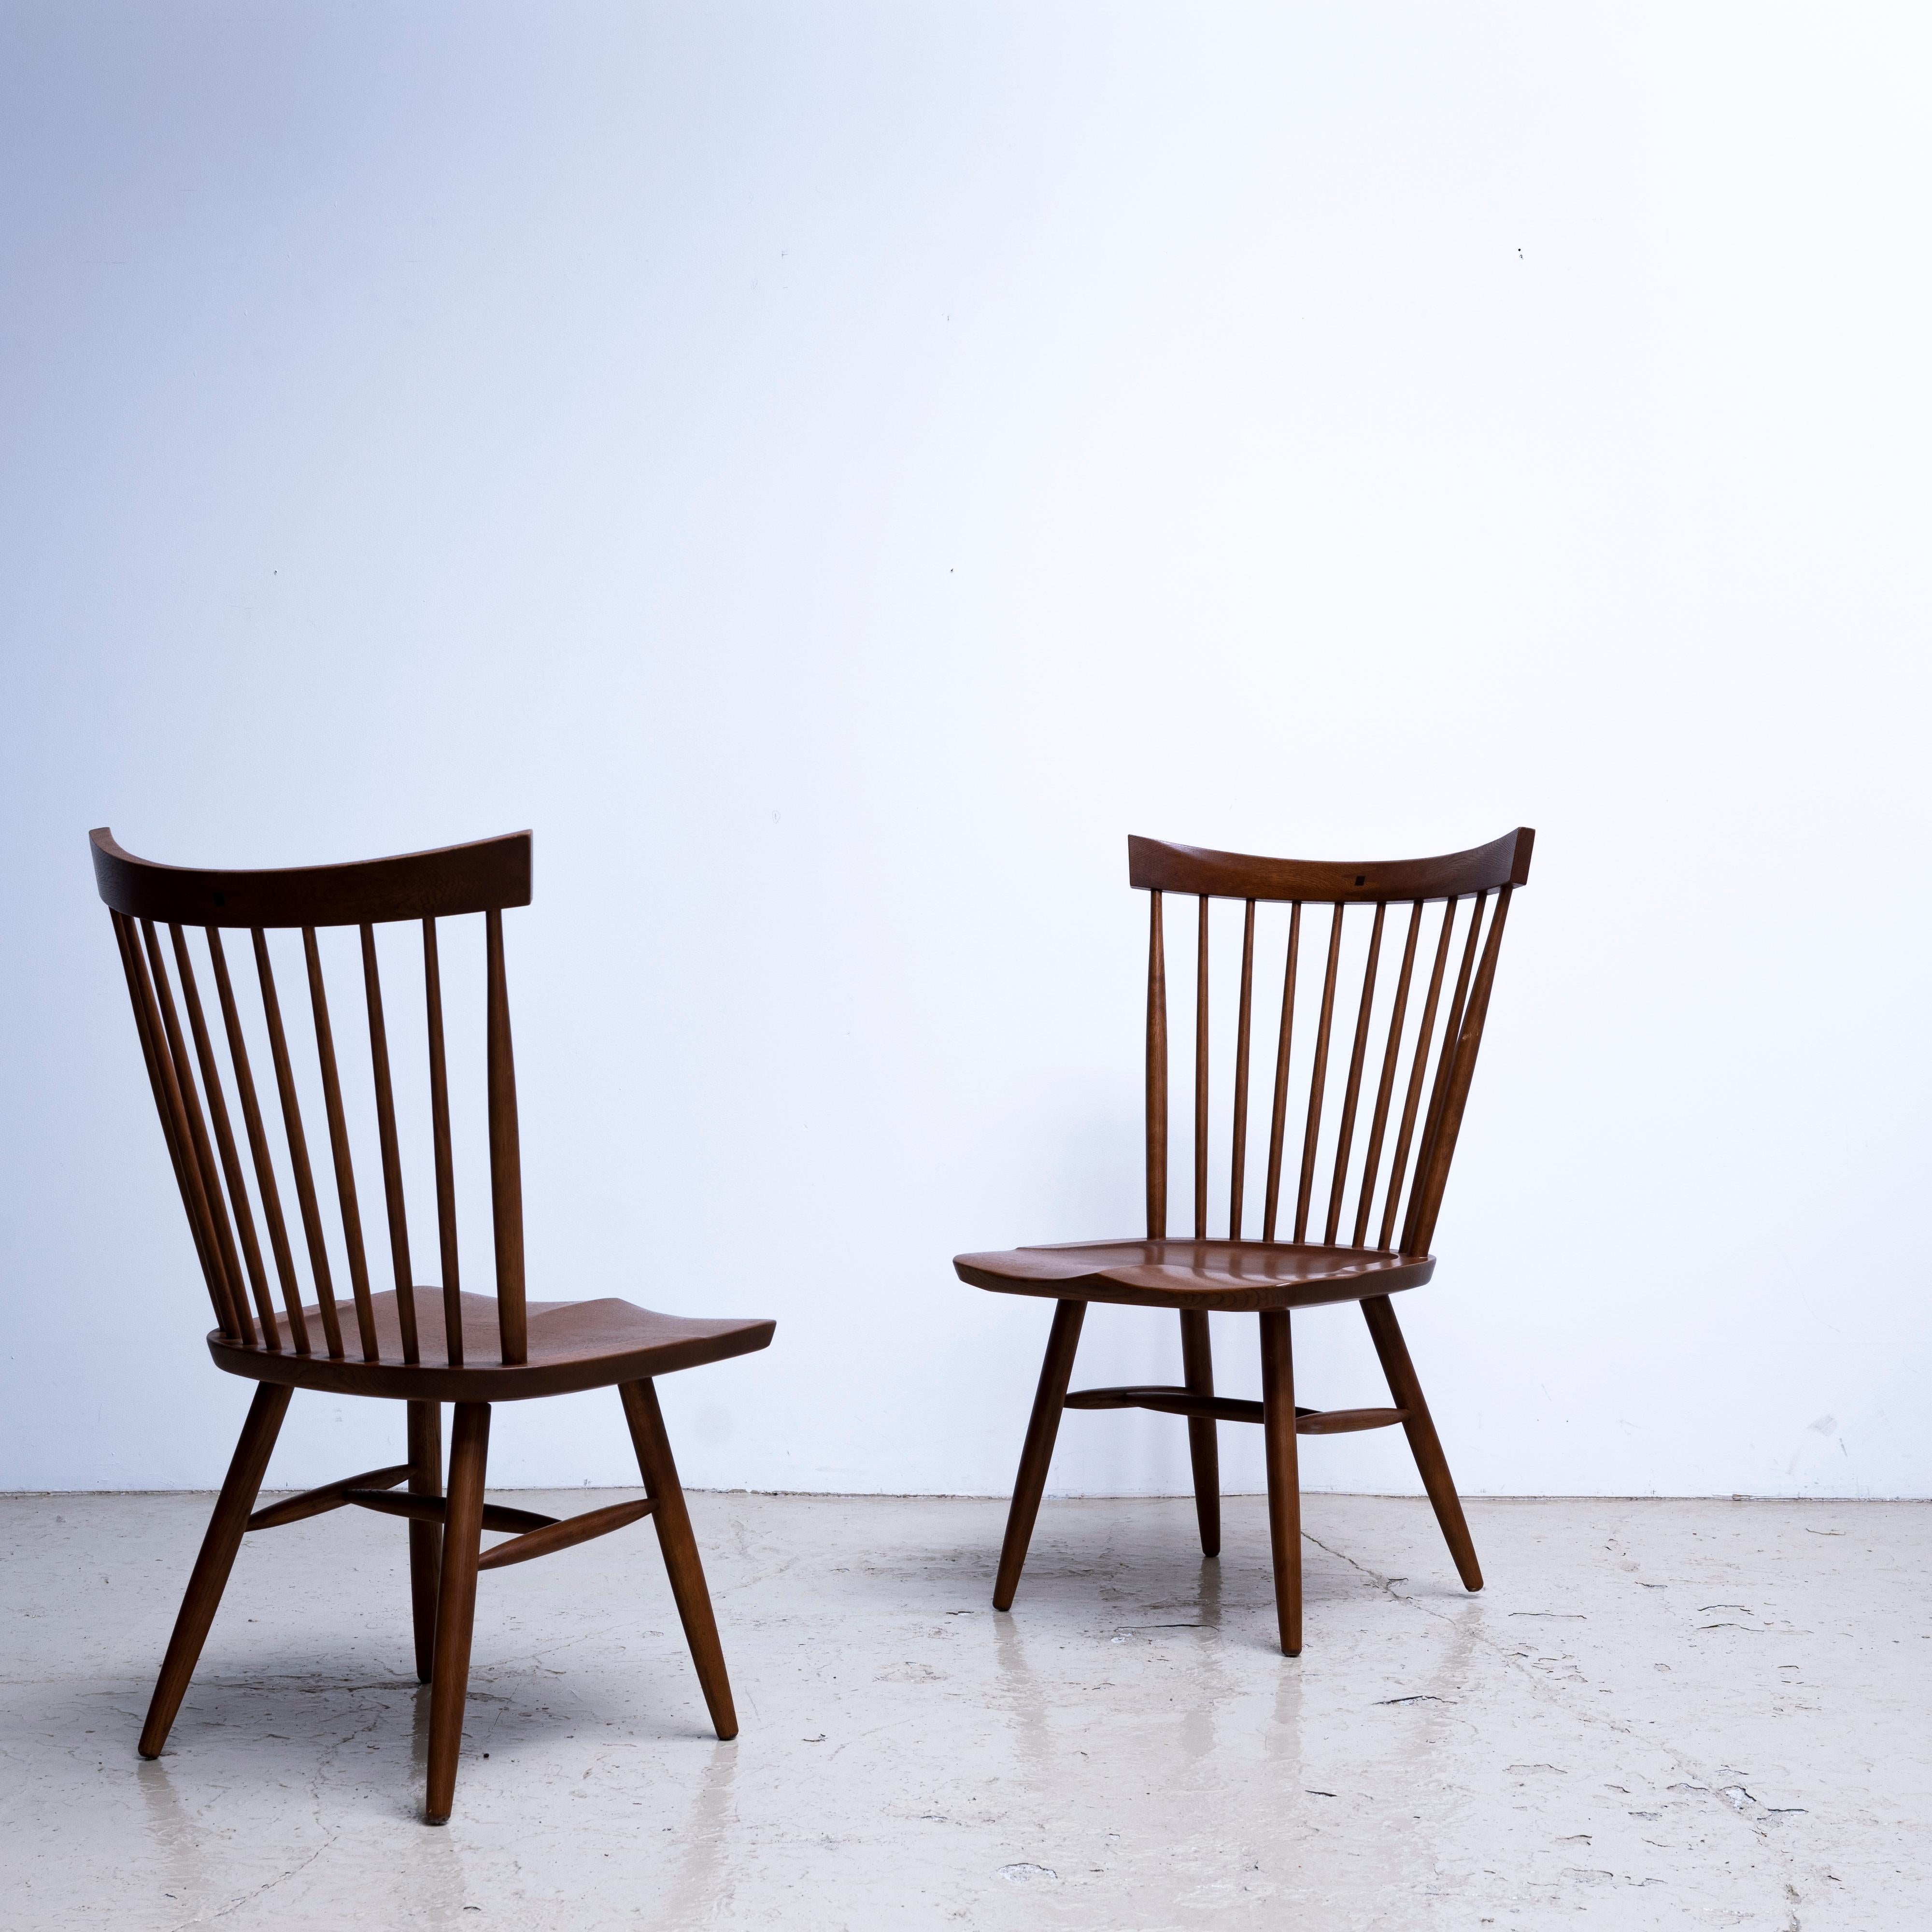 An excellent set of two side chairs called 